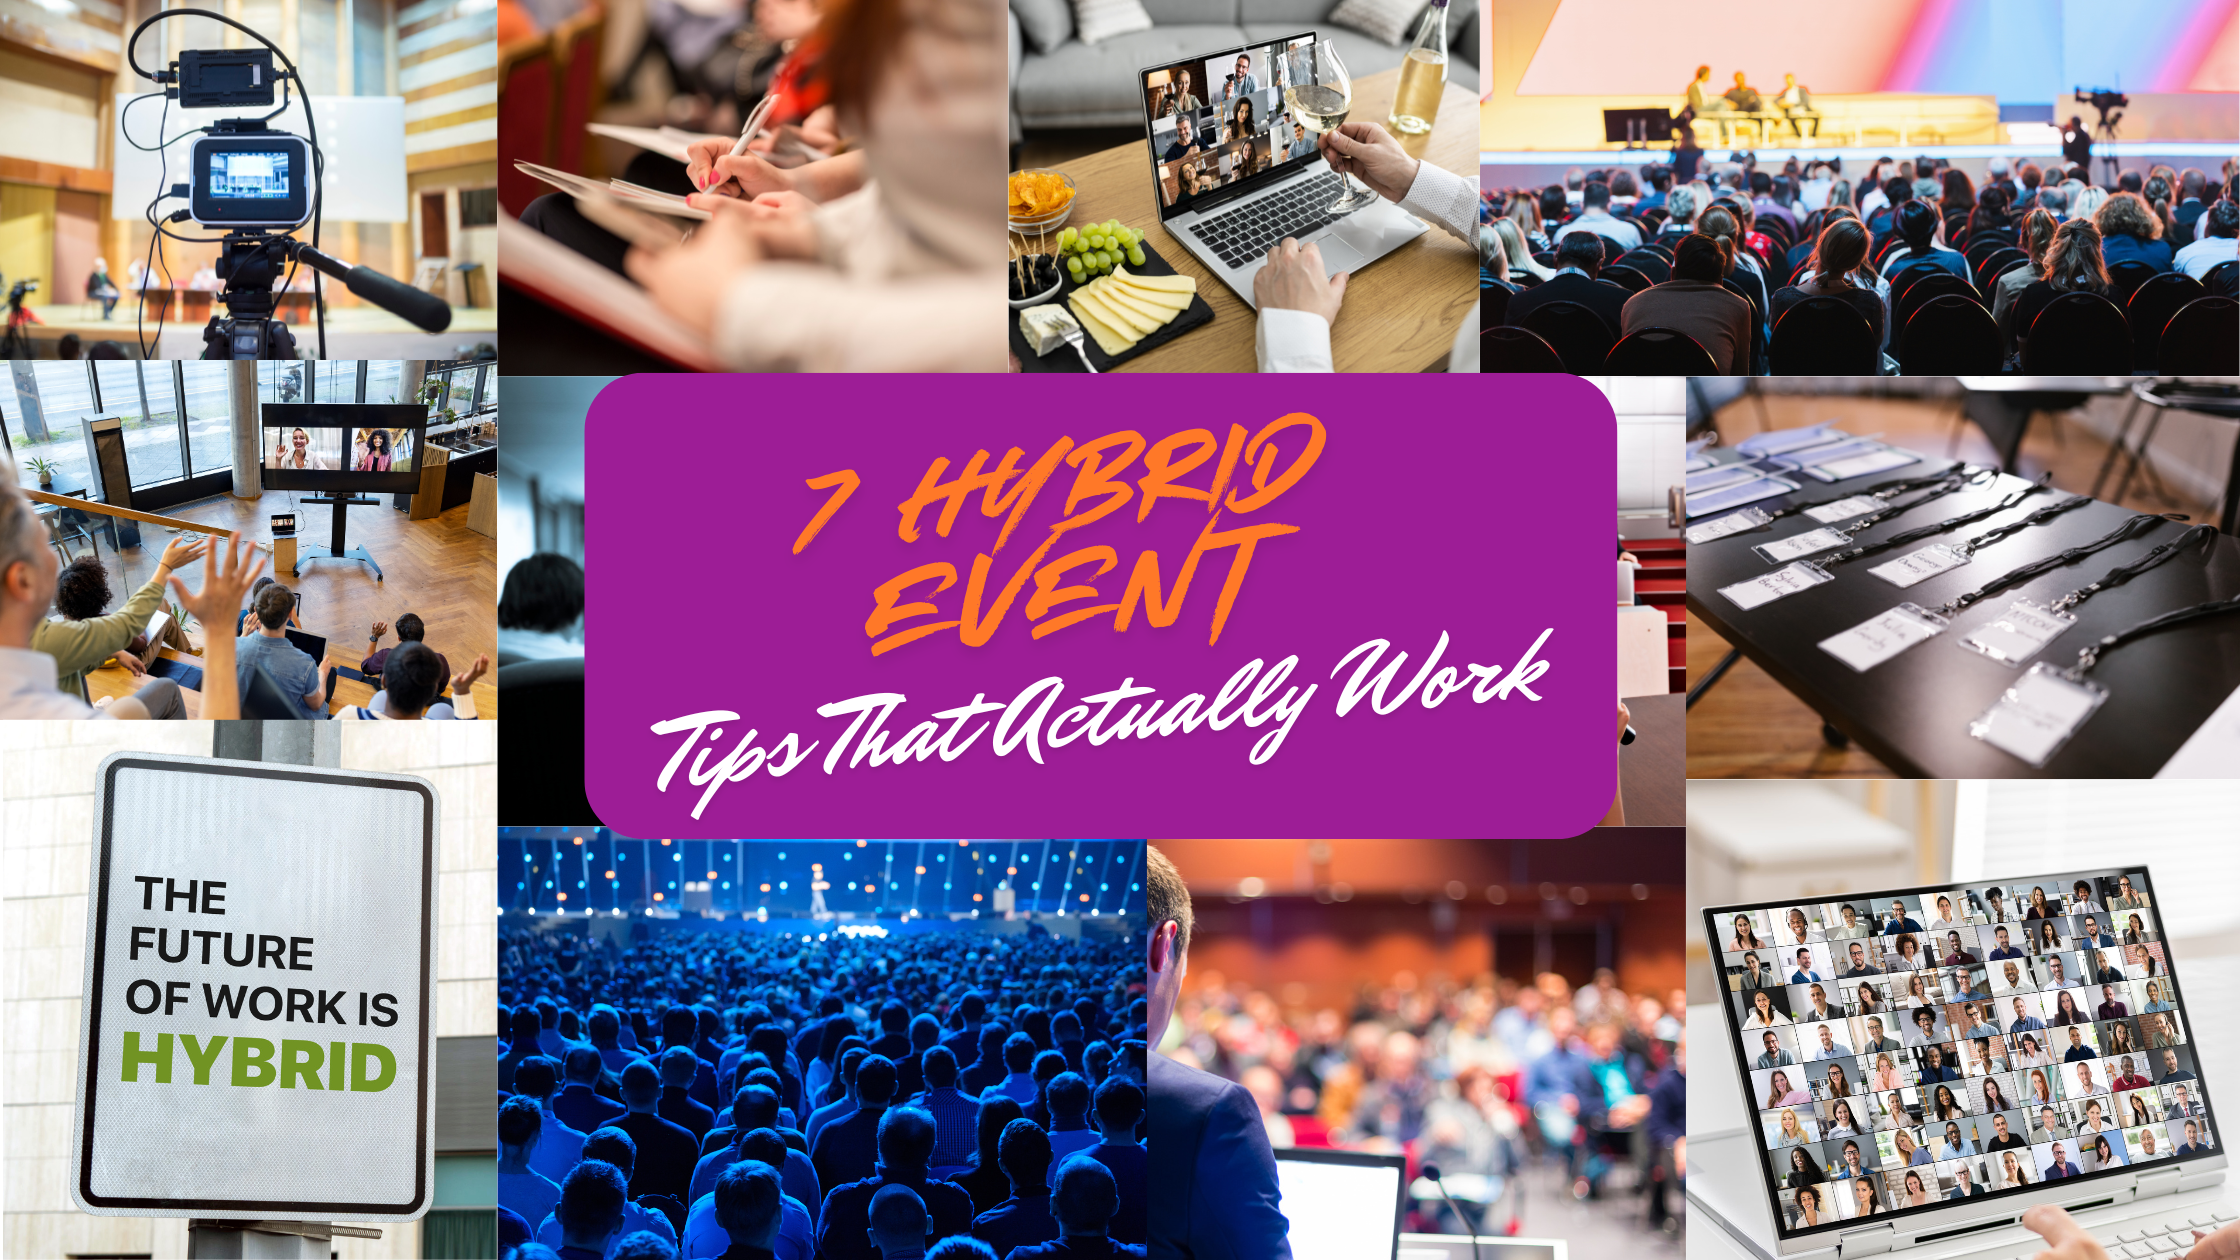 7 hybrid event tips that Actually work